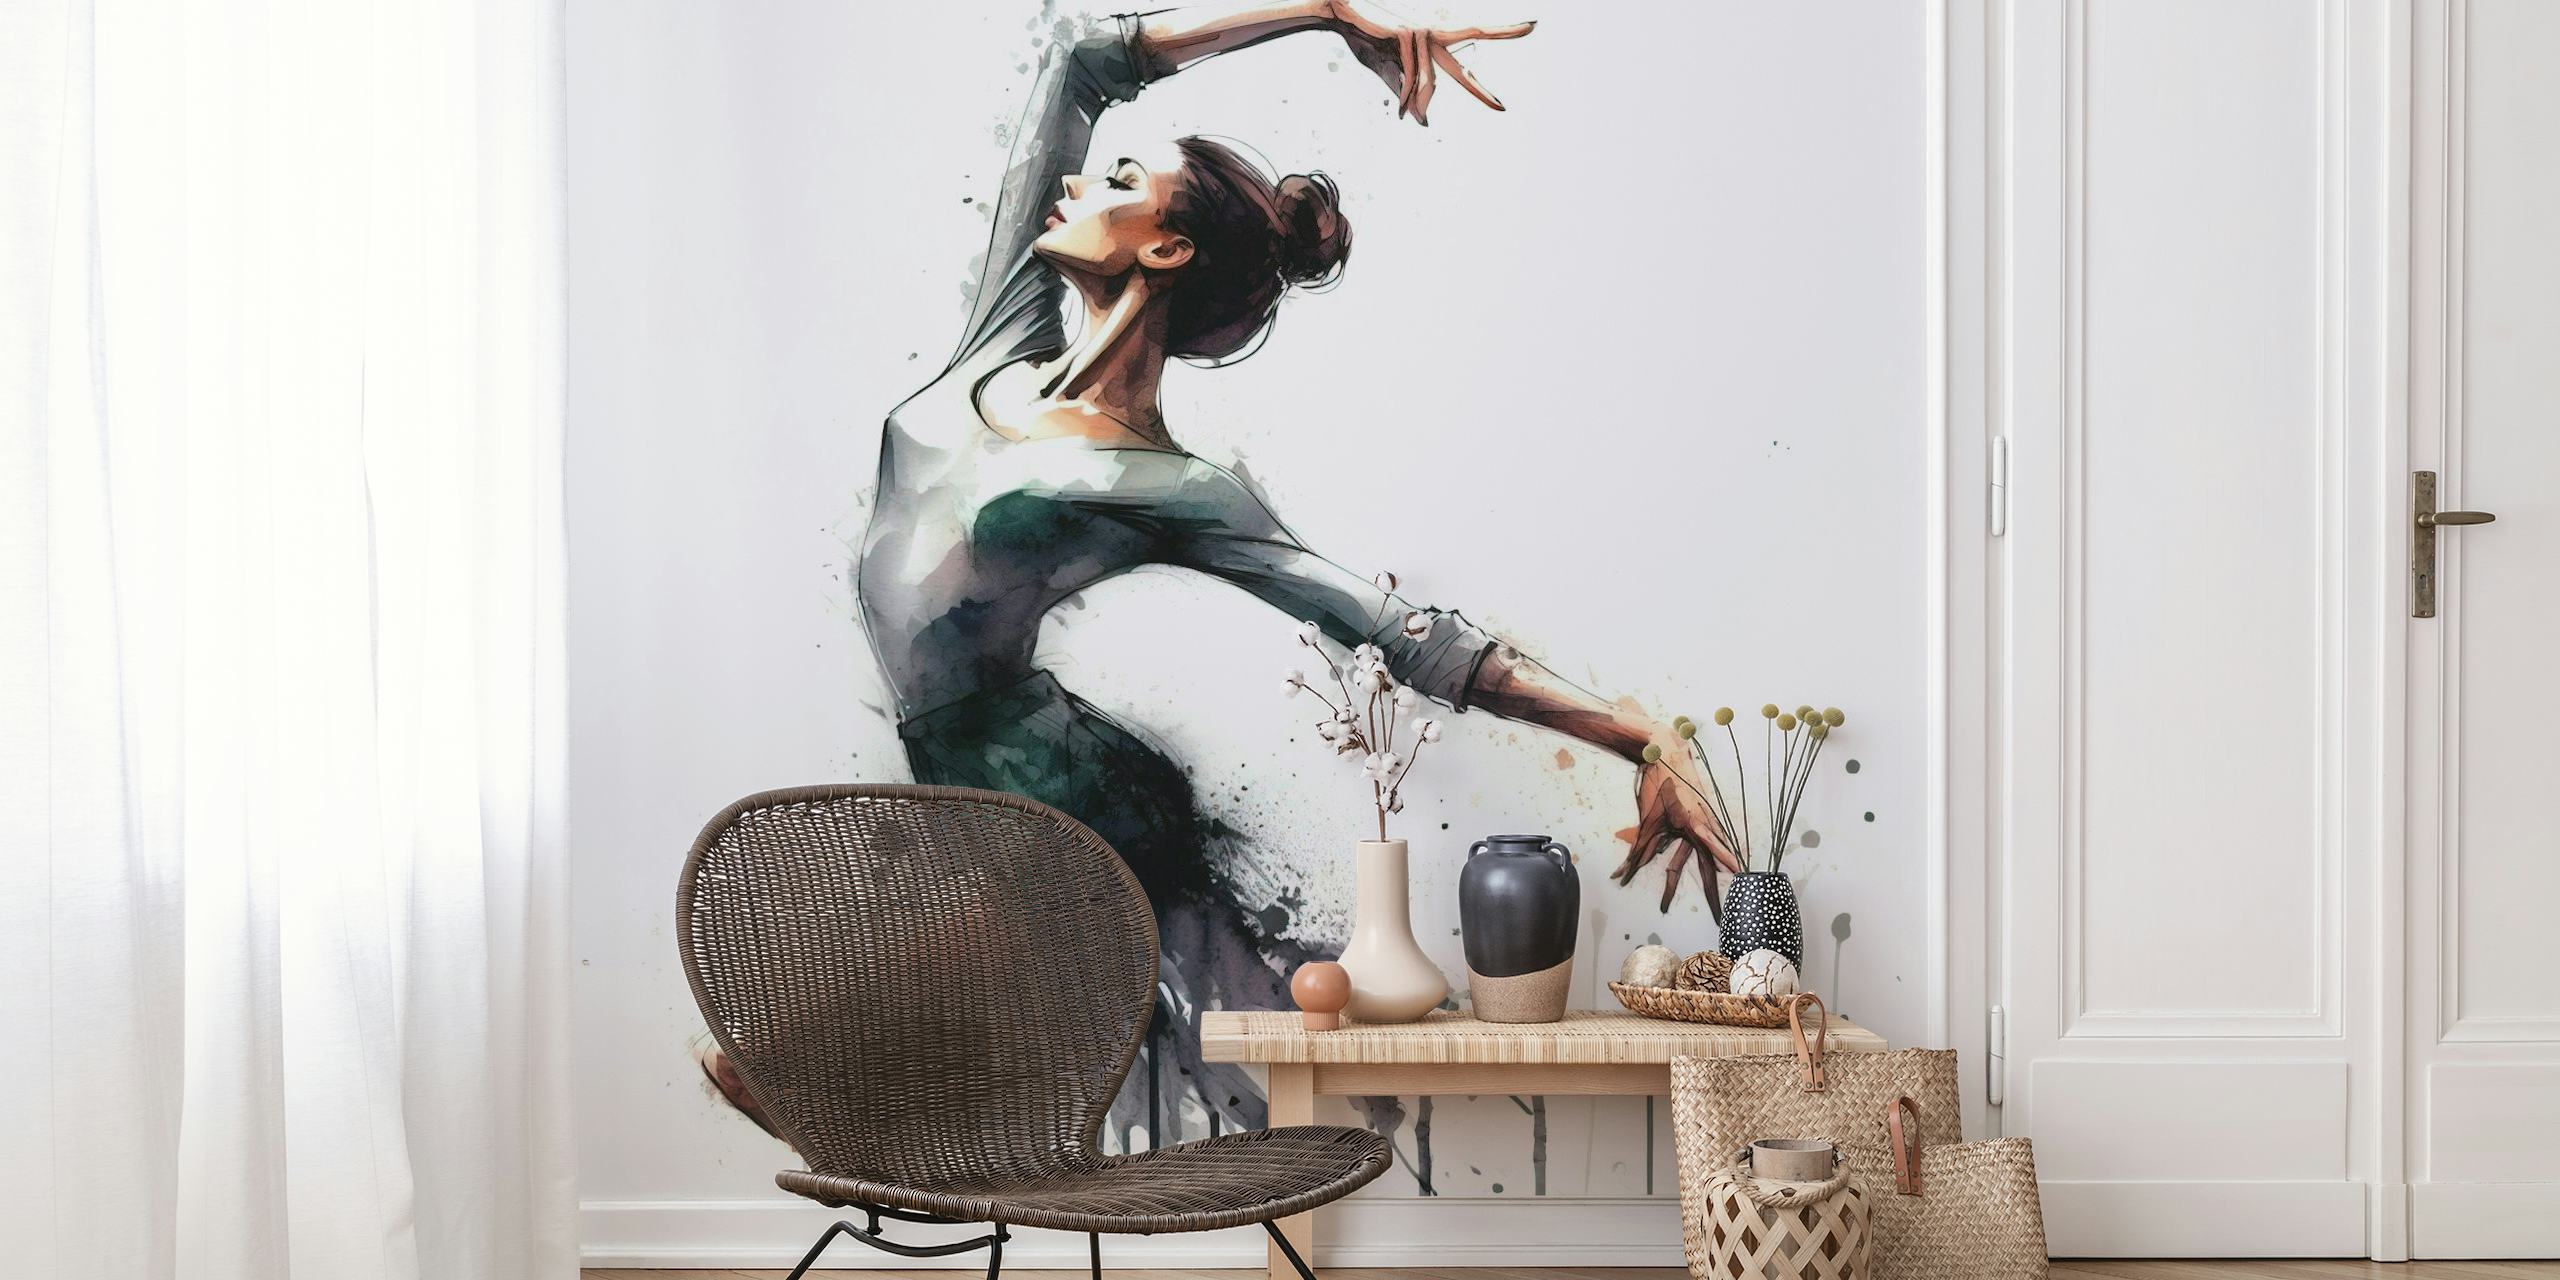 Artistic watercolor wall mural of a ballet dancer in motion